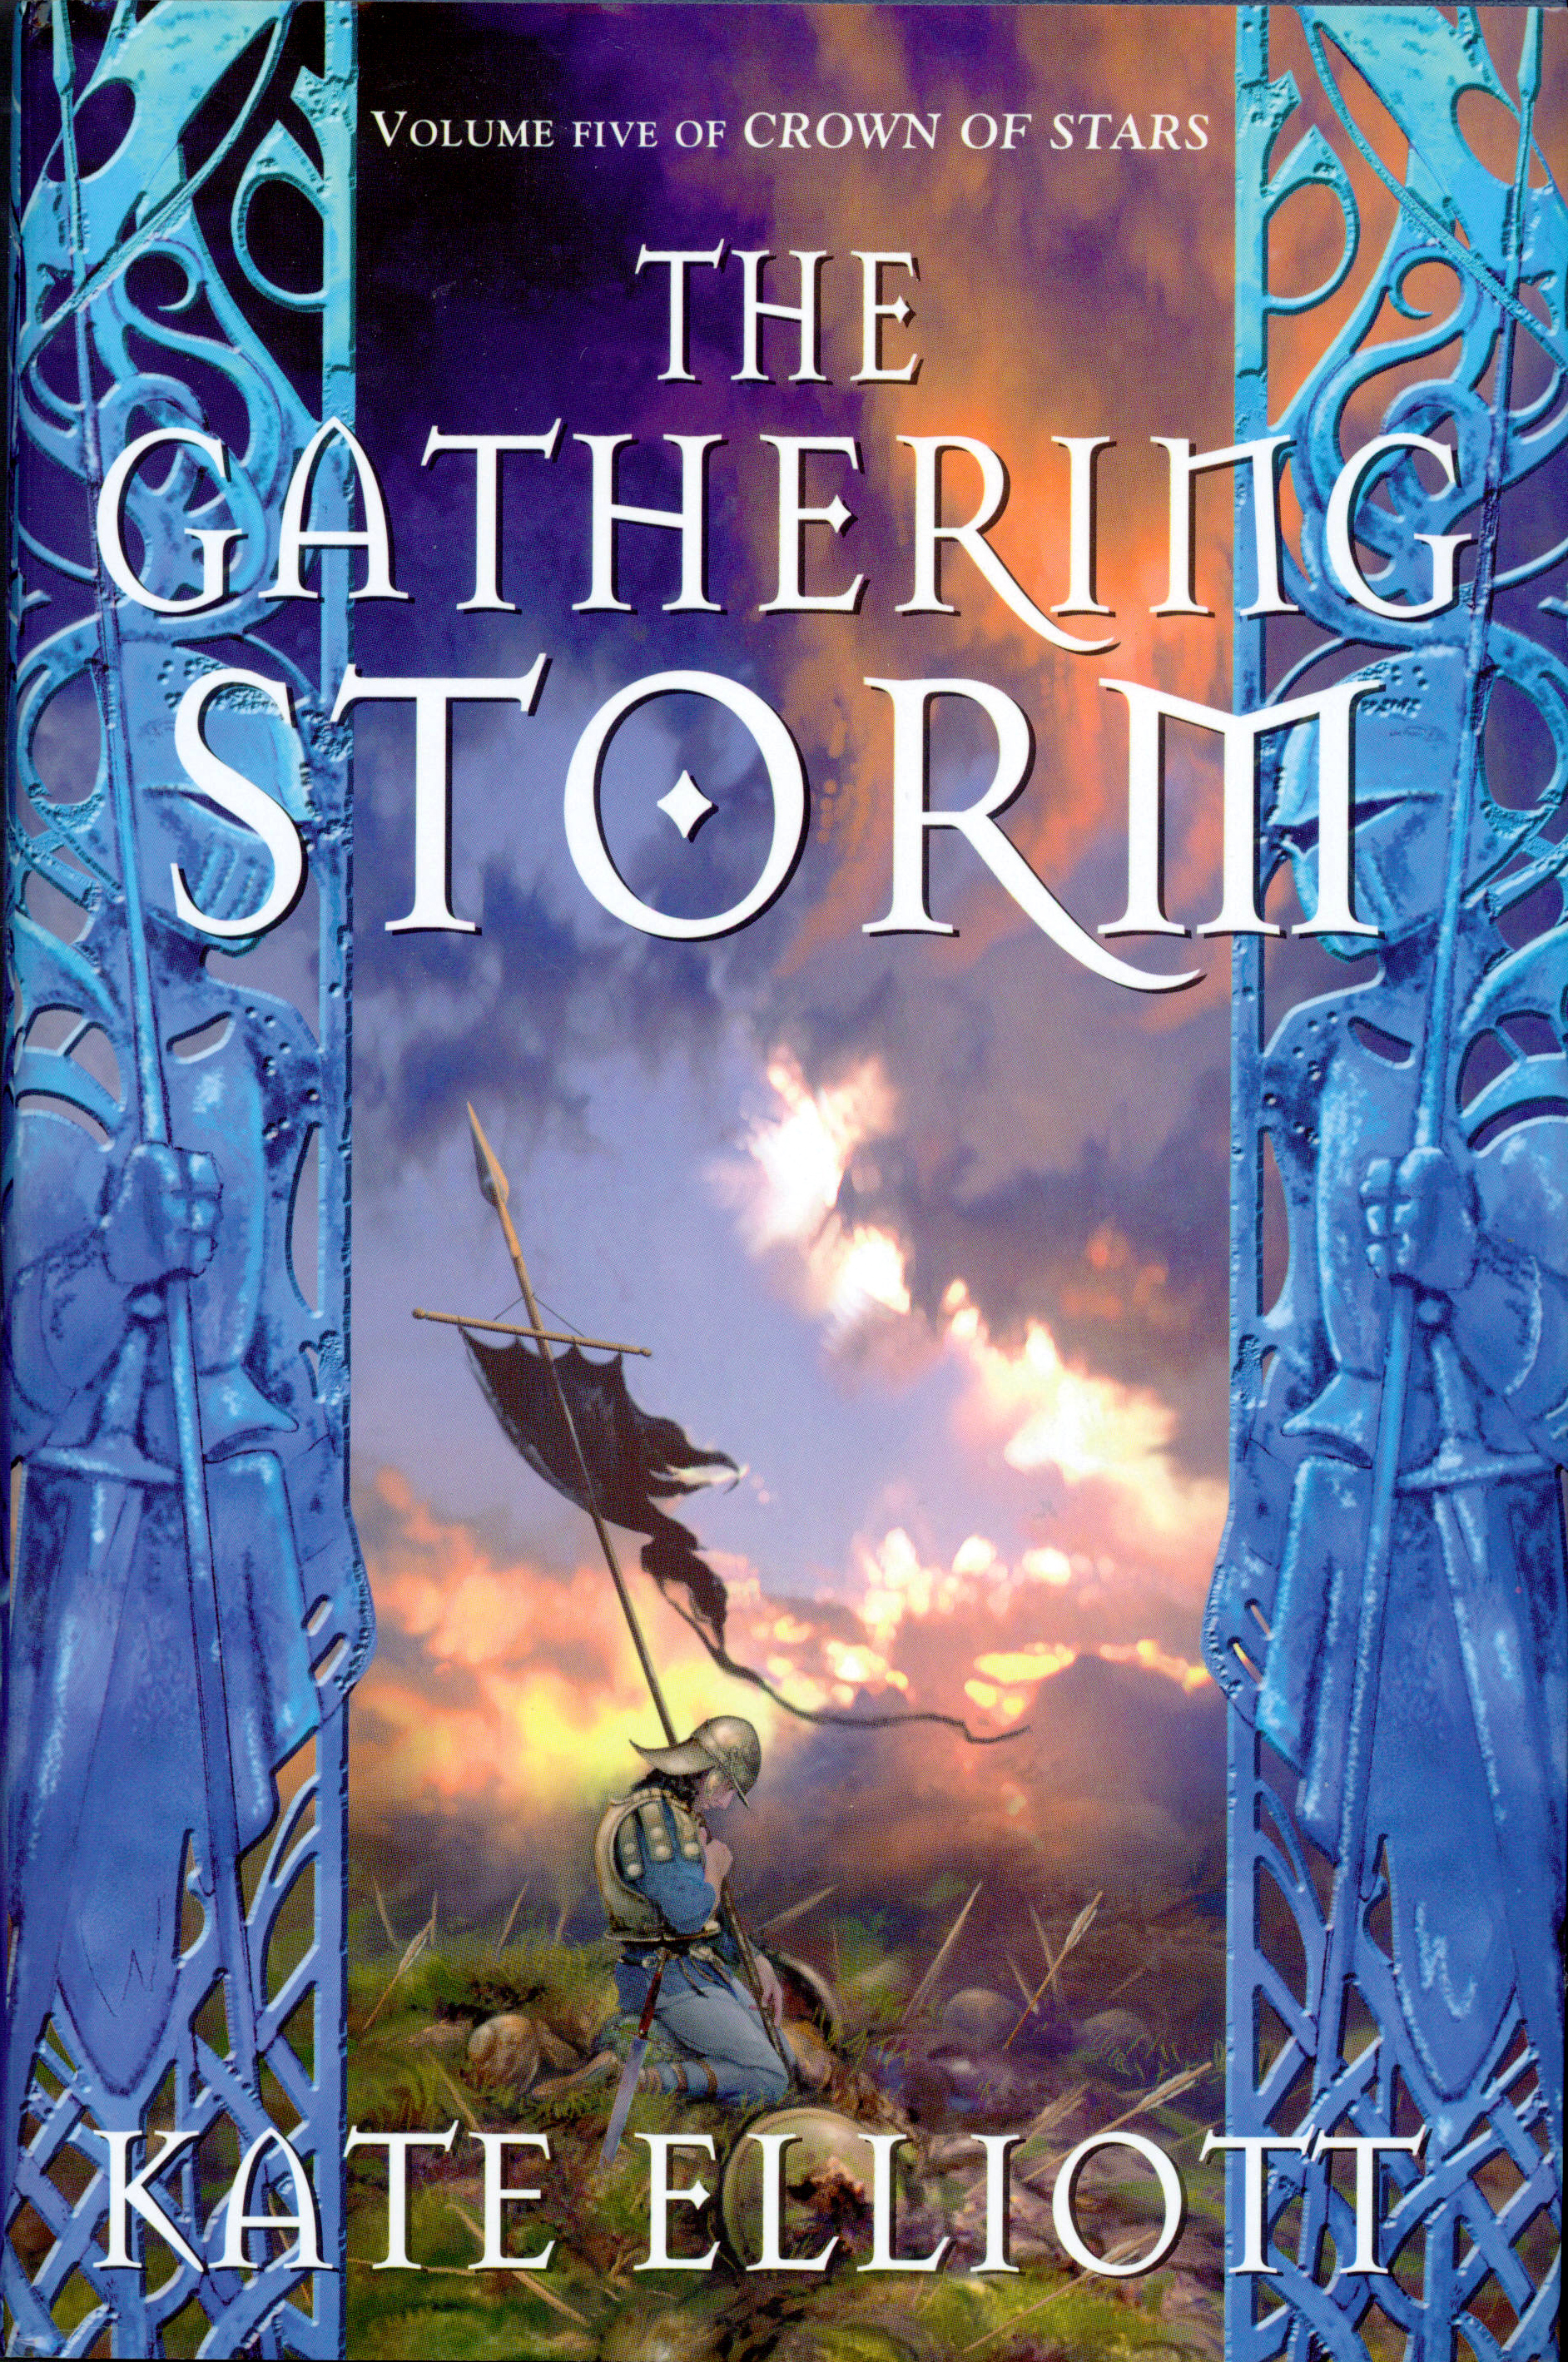 The Gathering Storm by Kate Elliot